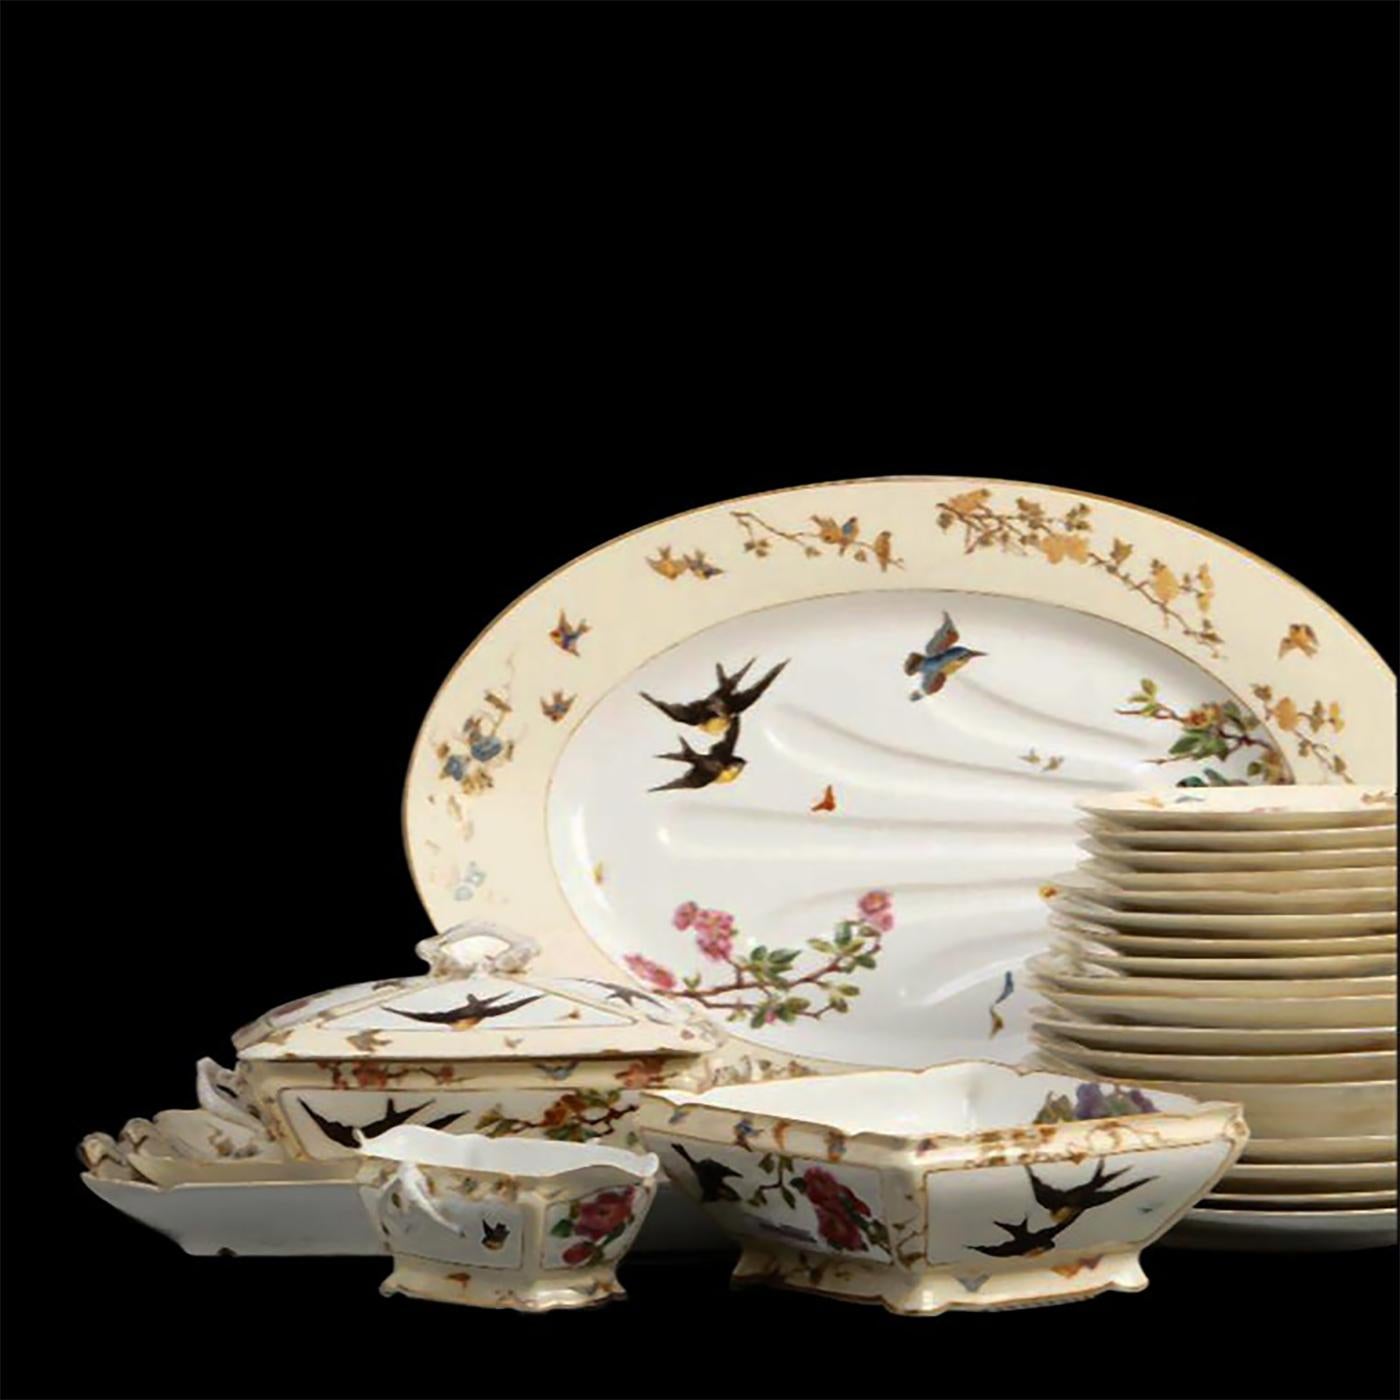 This 19th-century service is signed by world-well-known CFH-GDM Charles Field Haviland. His very high-quality porcelain with hand-painted polychrome decoration 